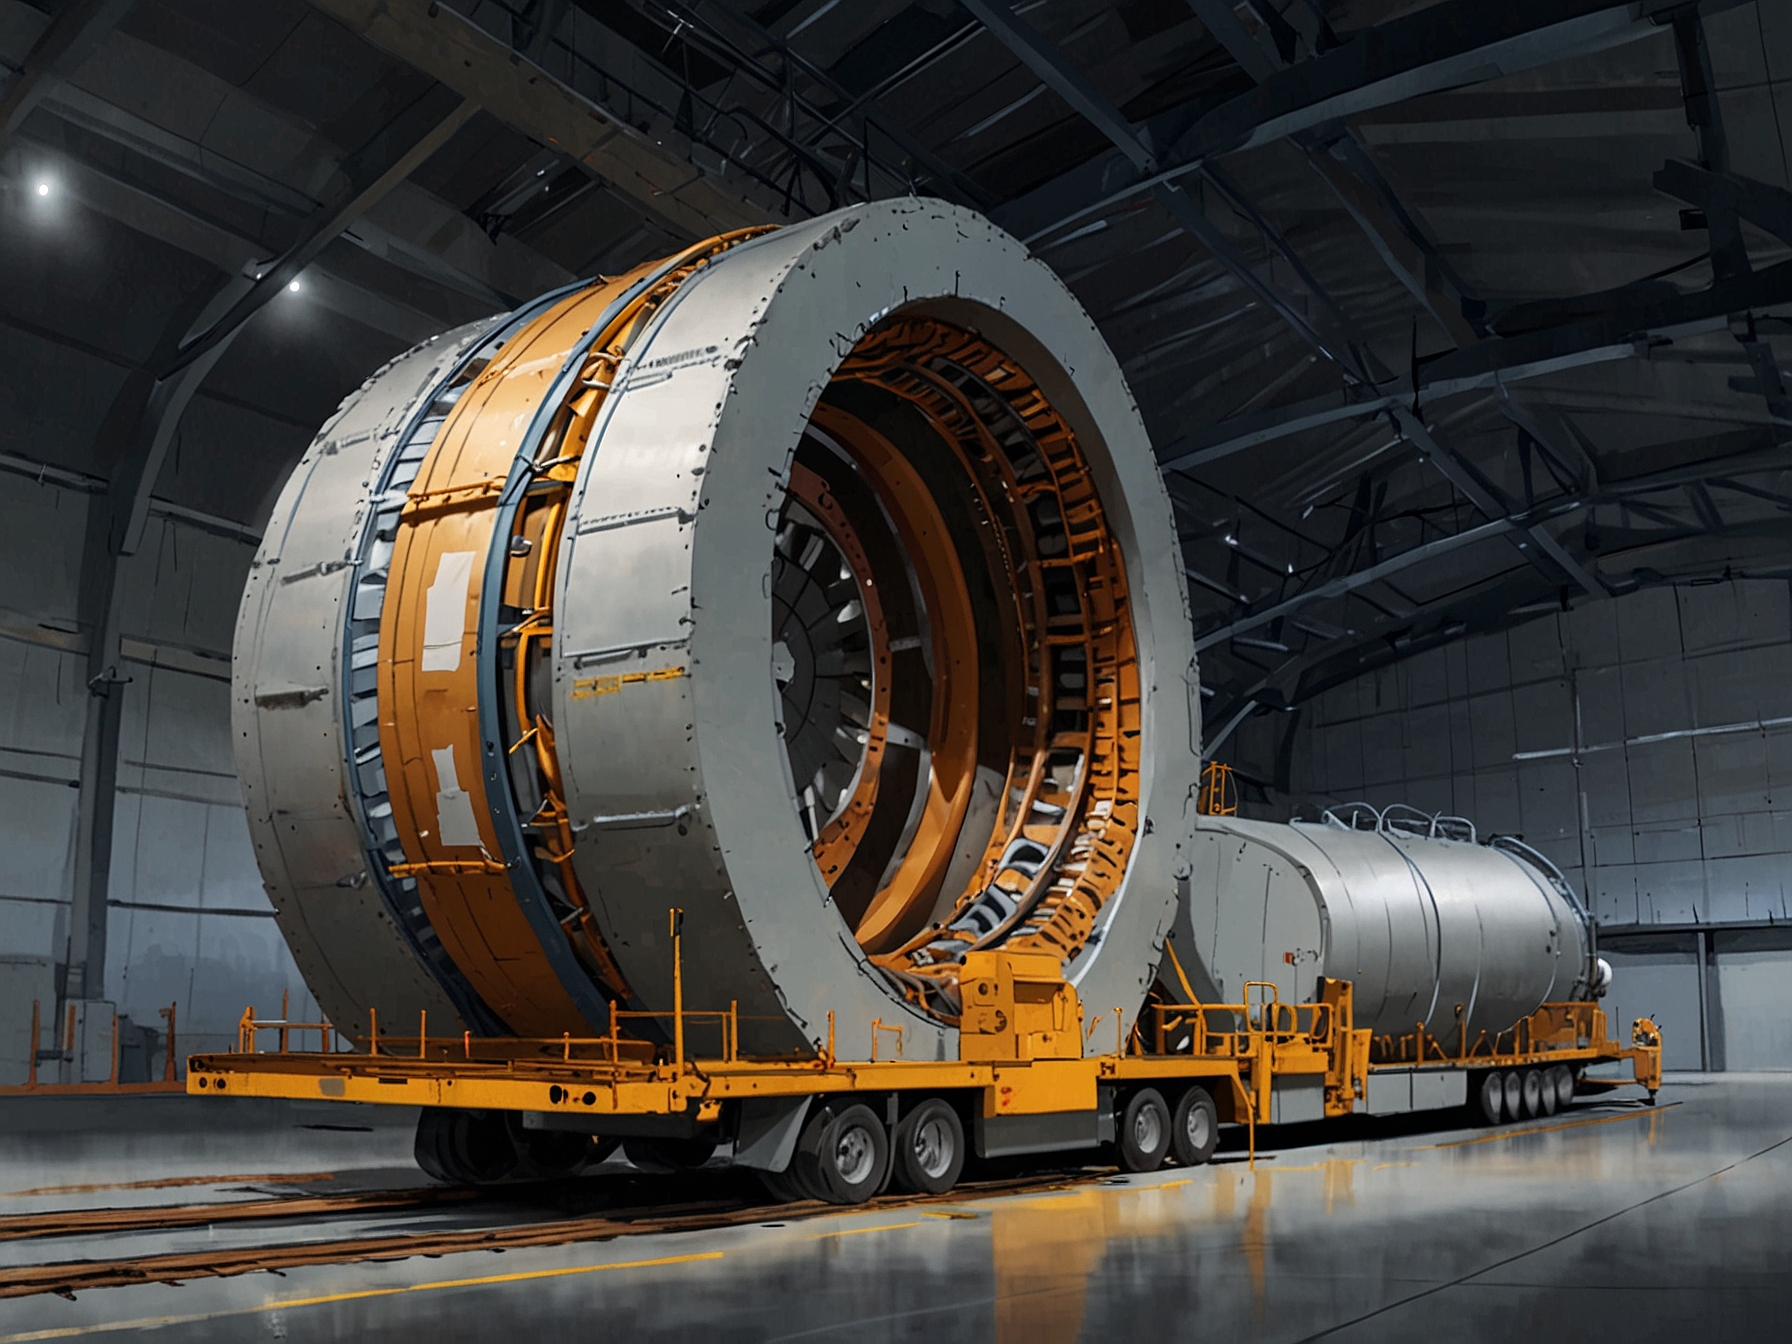 The logistical journey of transporting a colossal toroidal field coil to ITER’s site in France. Special transport vehicles and routes were required to ensure the safe delivery of these essential components, showcasing international collaborative effort.